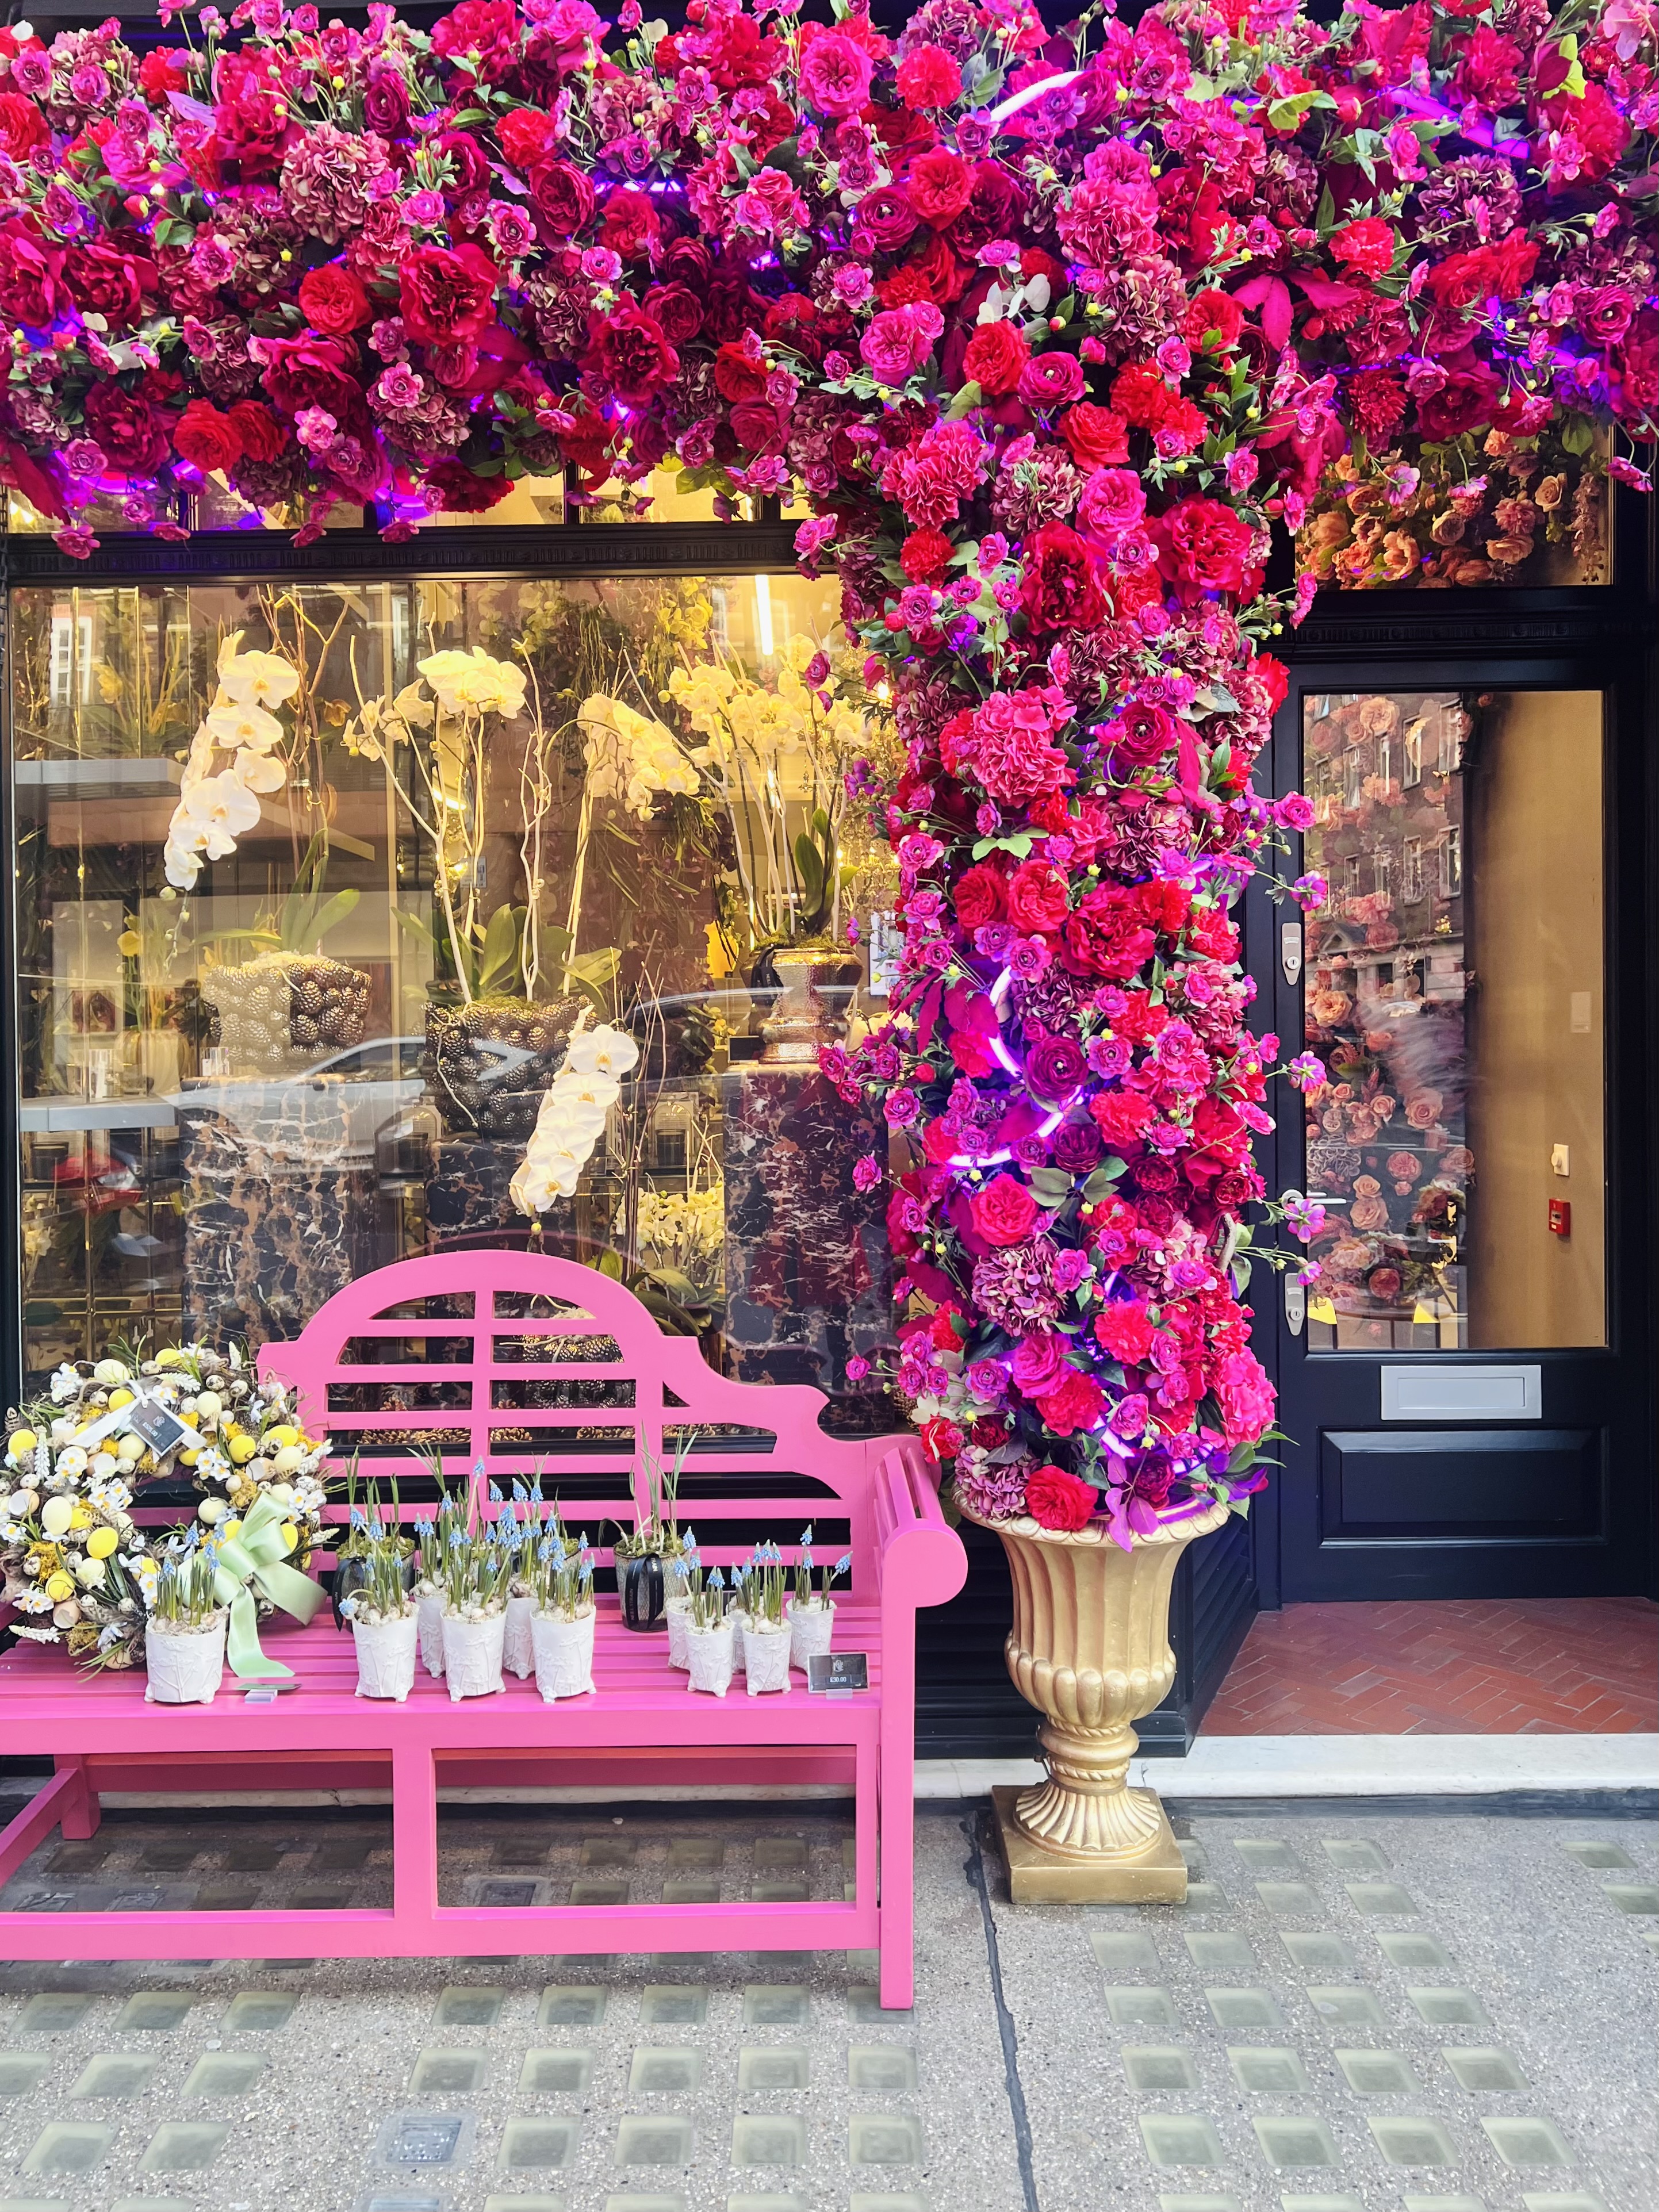 Flowers in Mayfair: romantic things to do for Valentine's Day in London